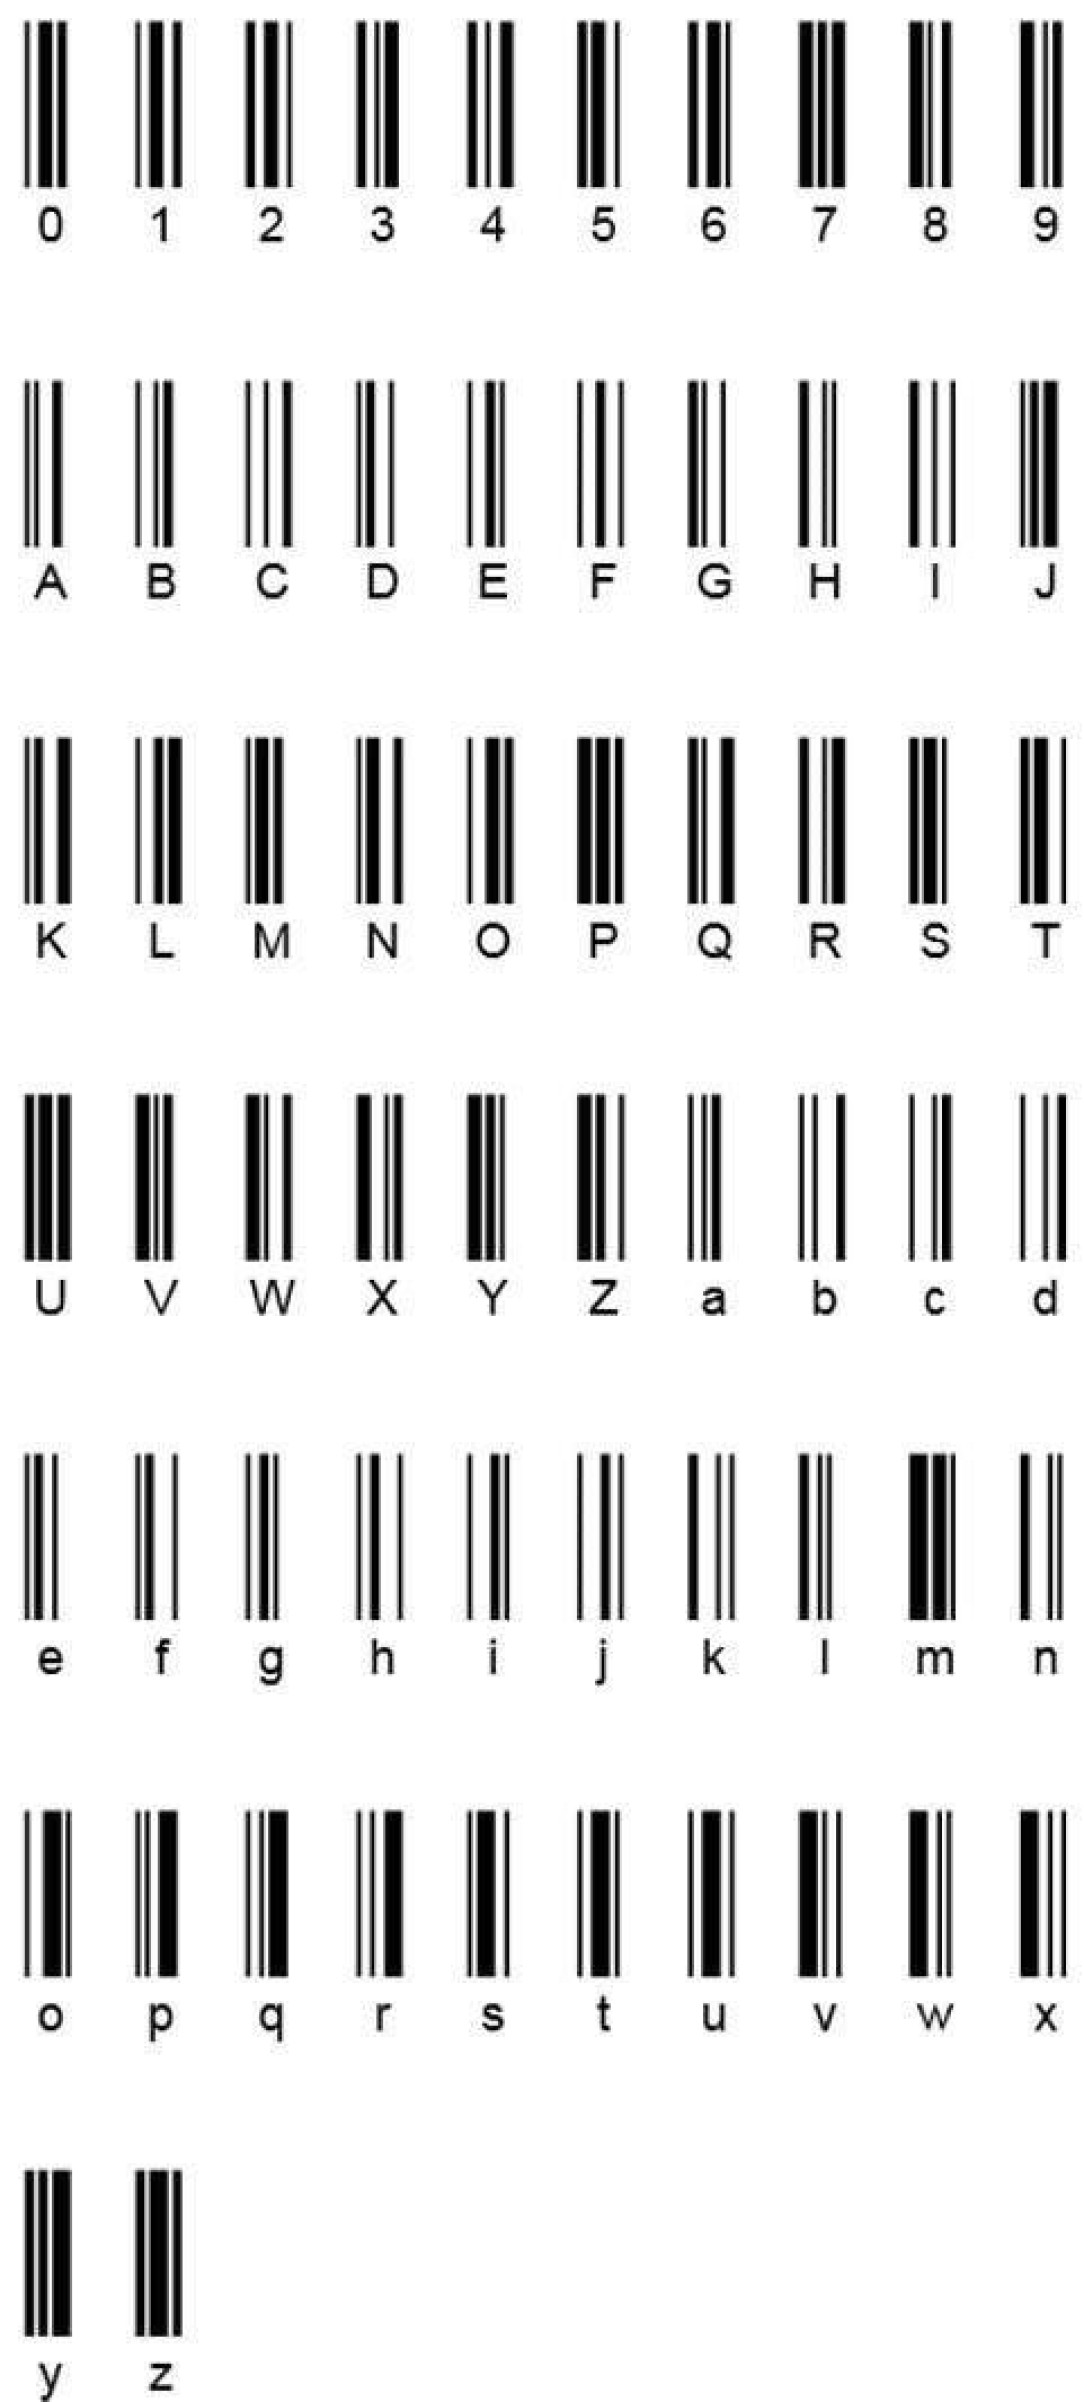 barcodes are a thing